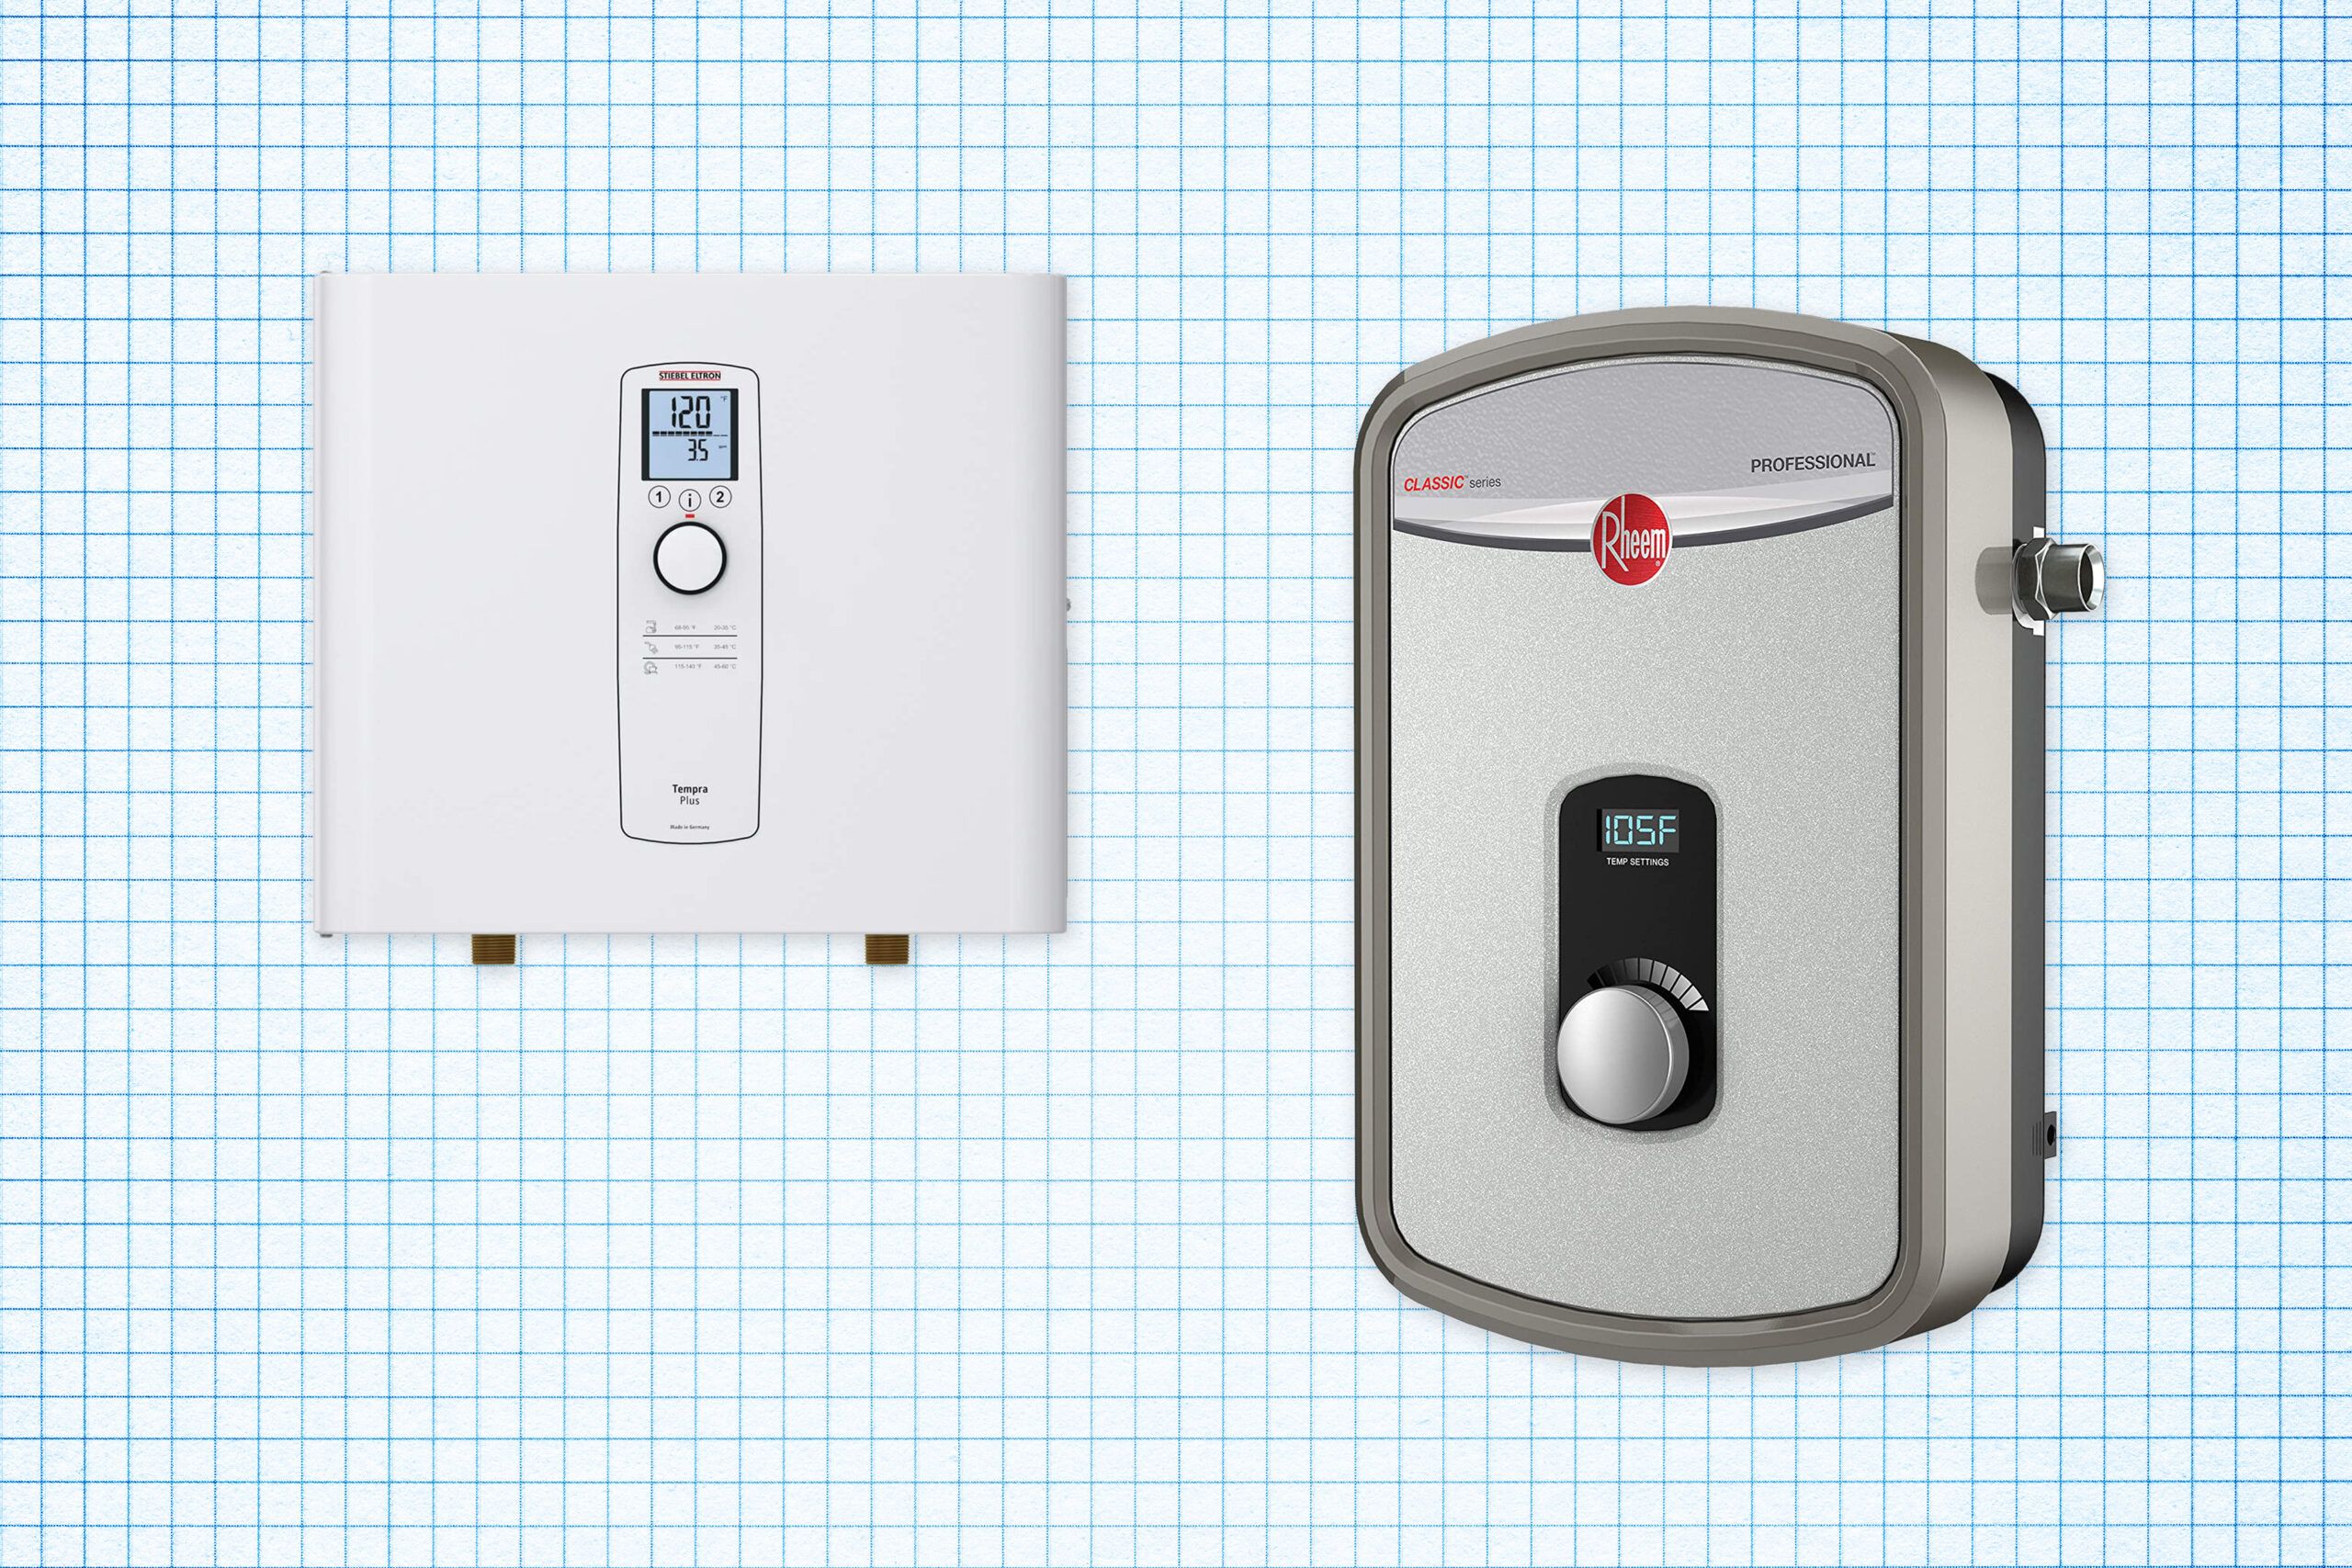 Stiebel Eltron Tankless Water Heater and Rheem Tankless Electric Water Heater isolated on a white grid paper background with blue lines; lead image for the best tankless water heaters buying guide